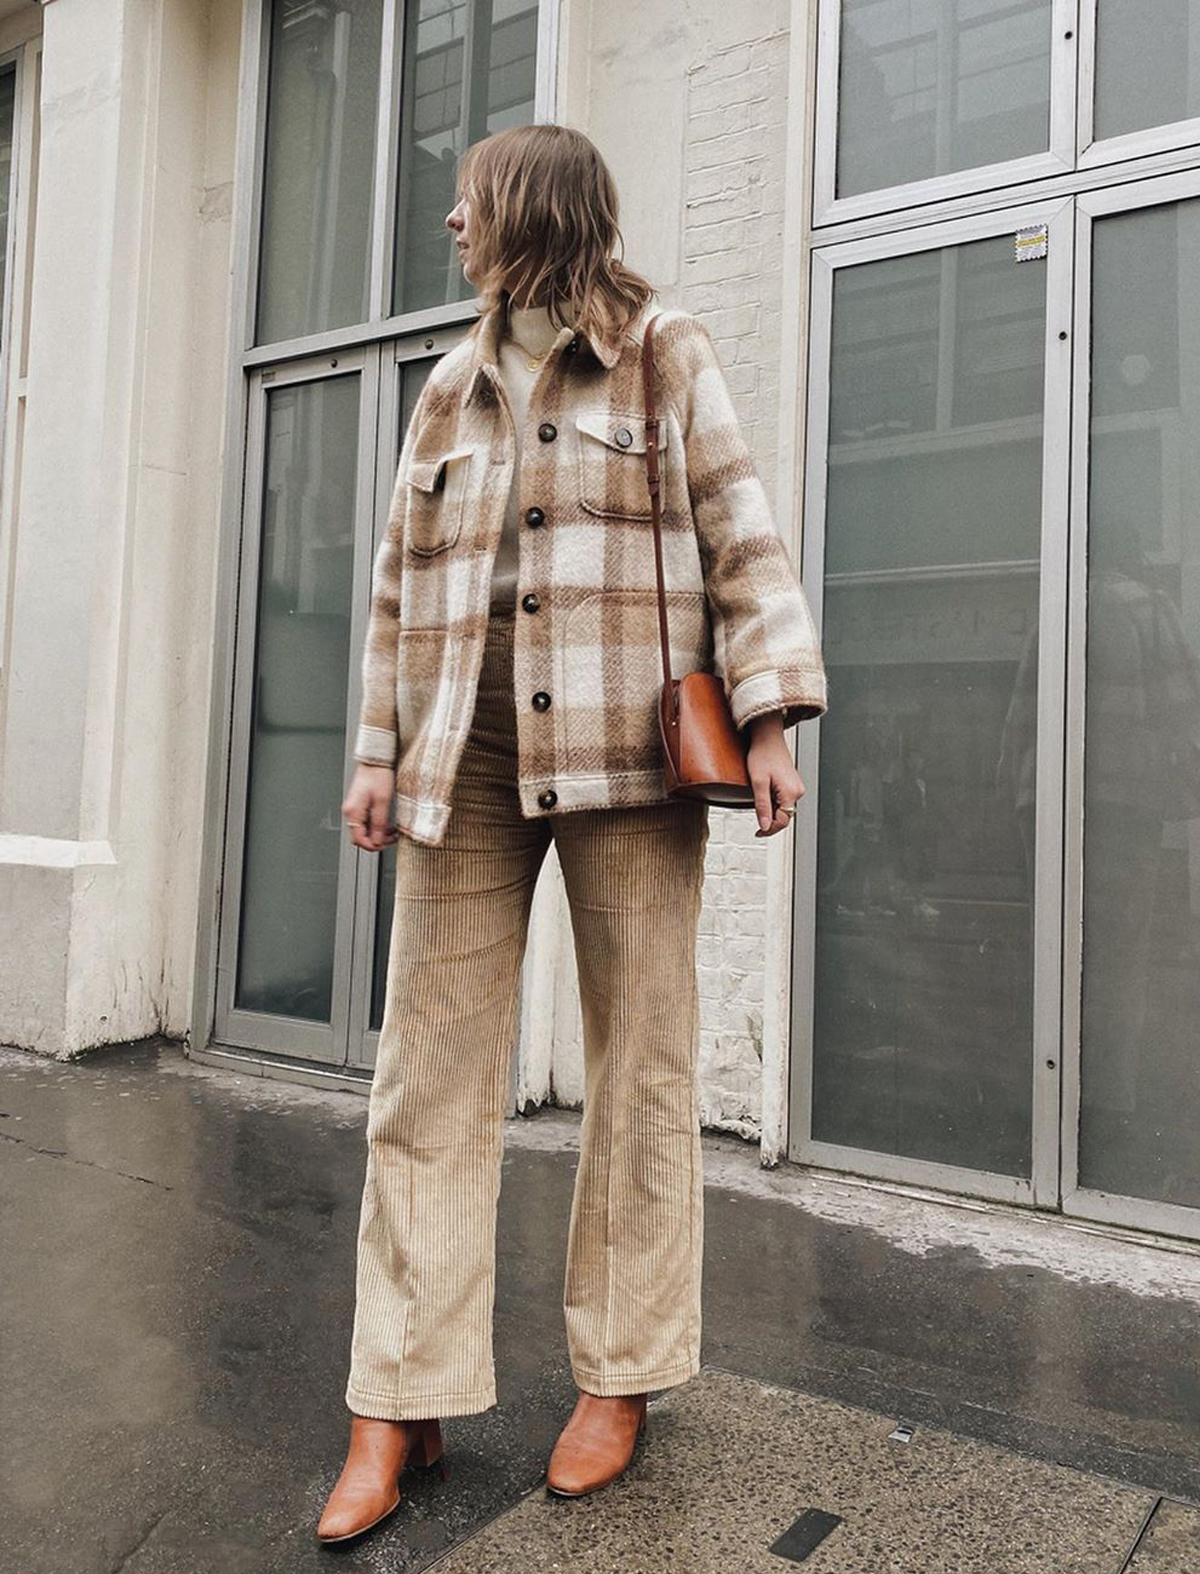 London coat trends: checked flannel jacket